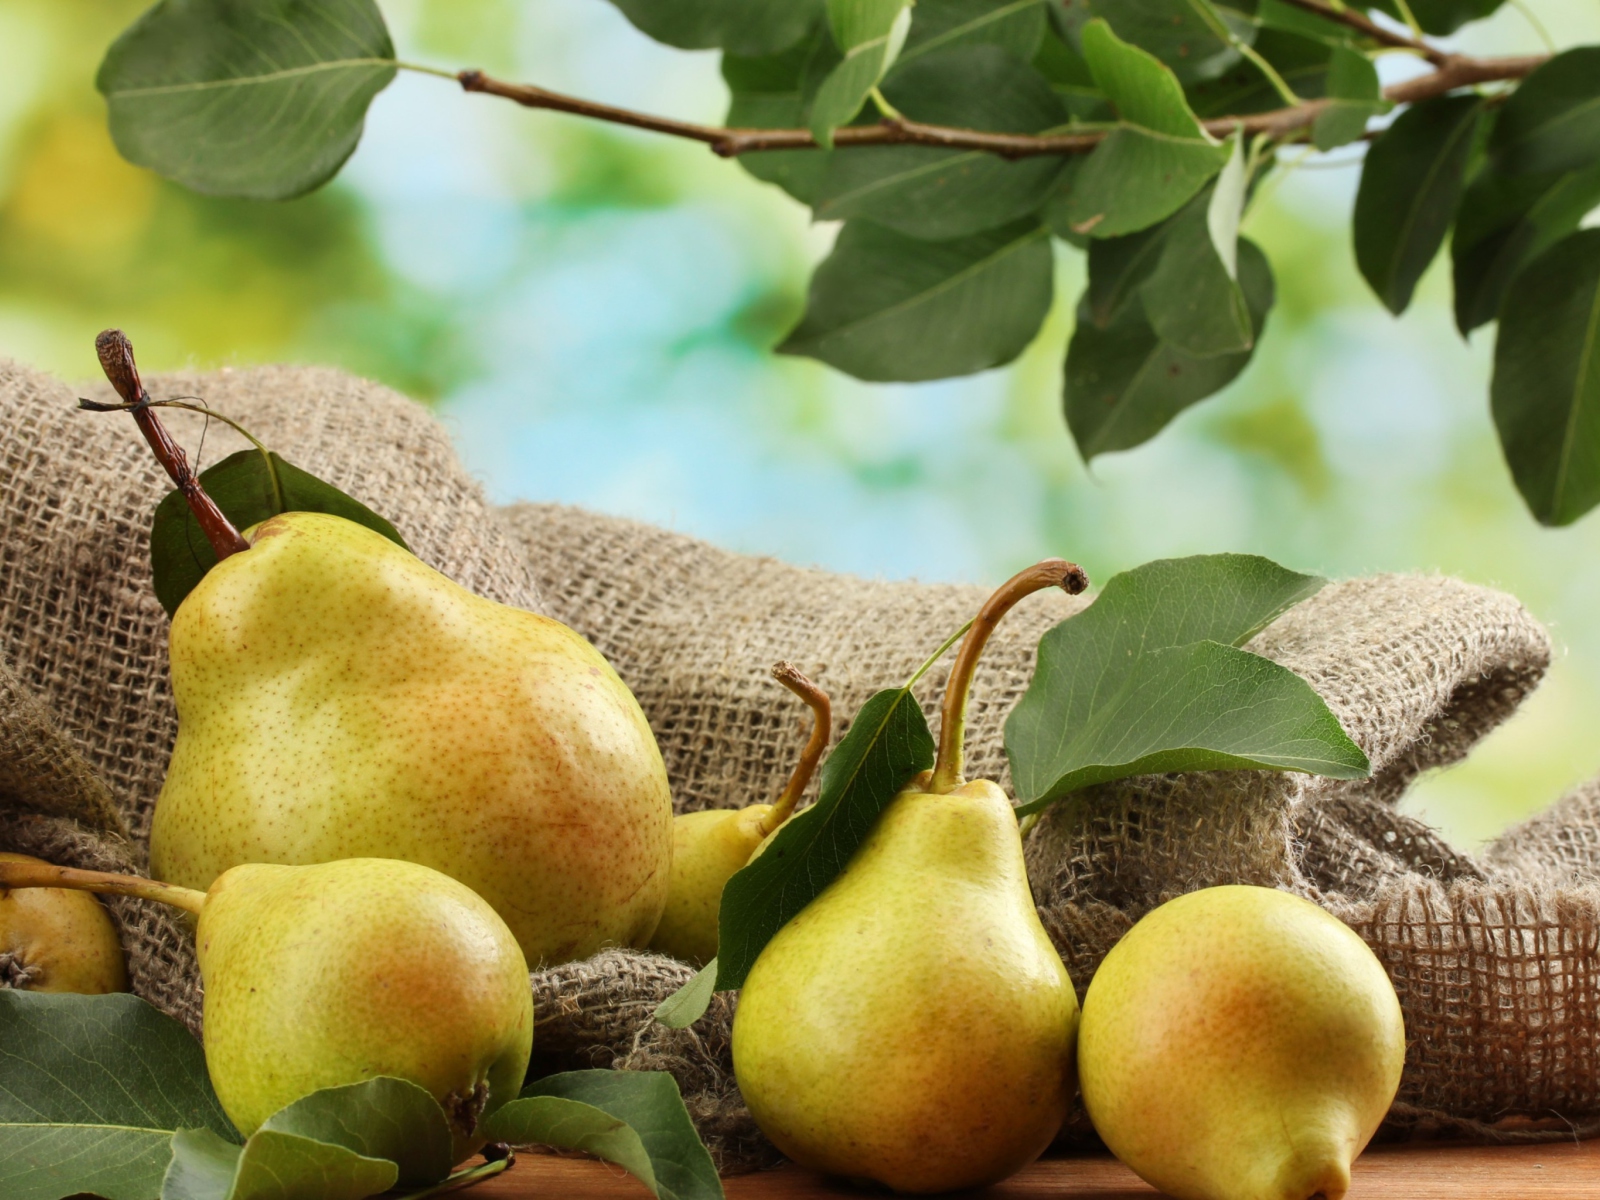 Fresh Pears With Leaves wallpaper 1600x1200